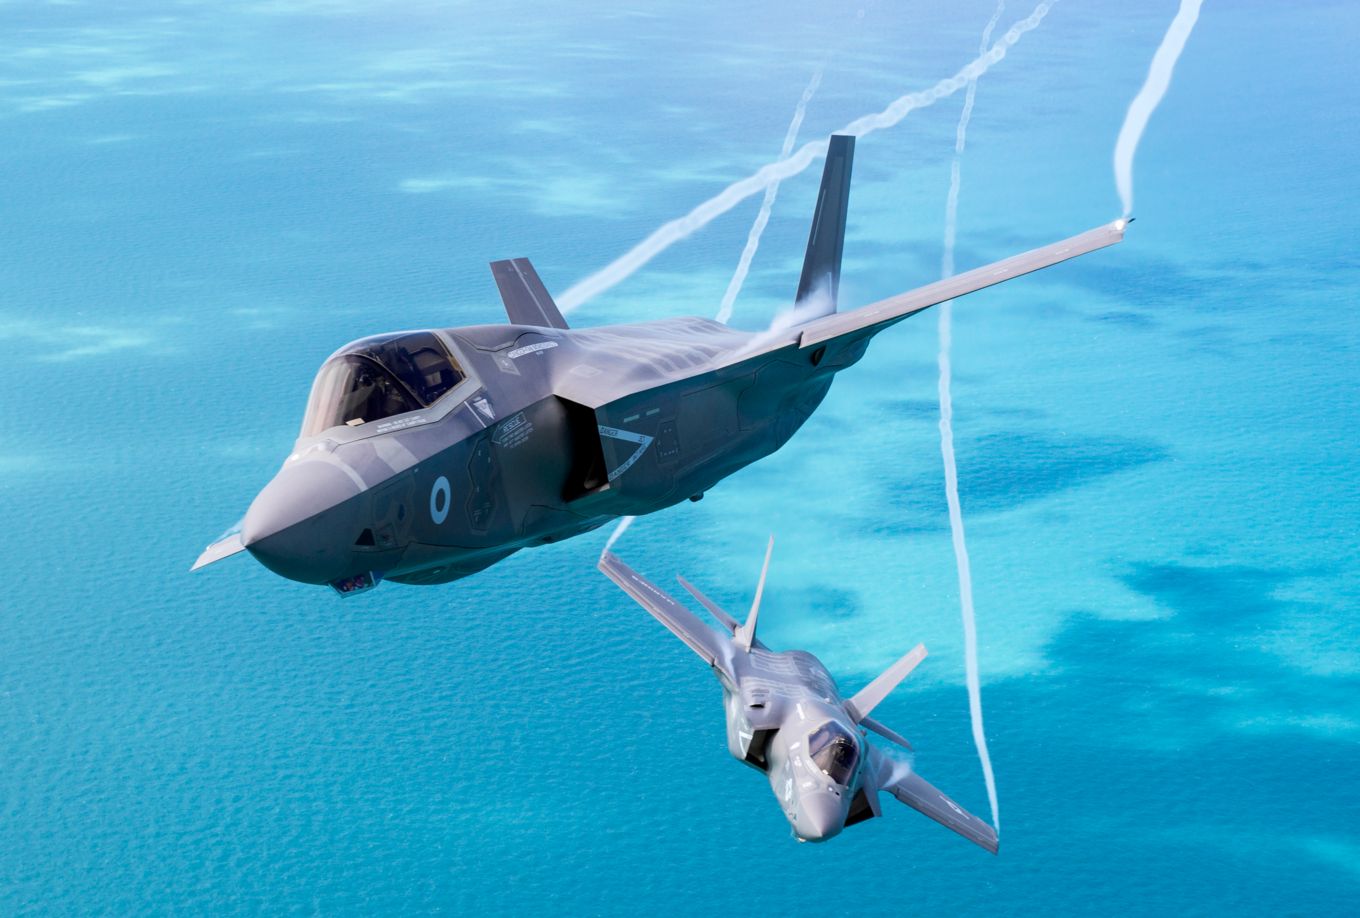 Image shows two F-35 Lightning aircraft flying above the sea.